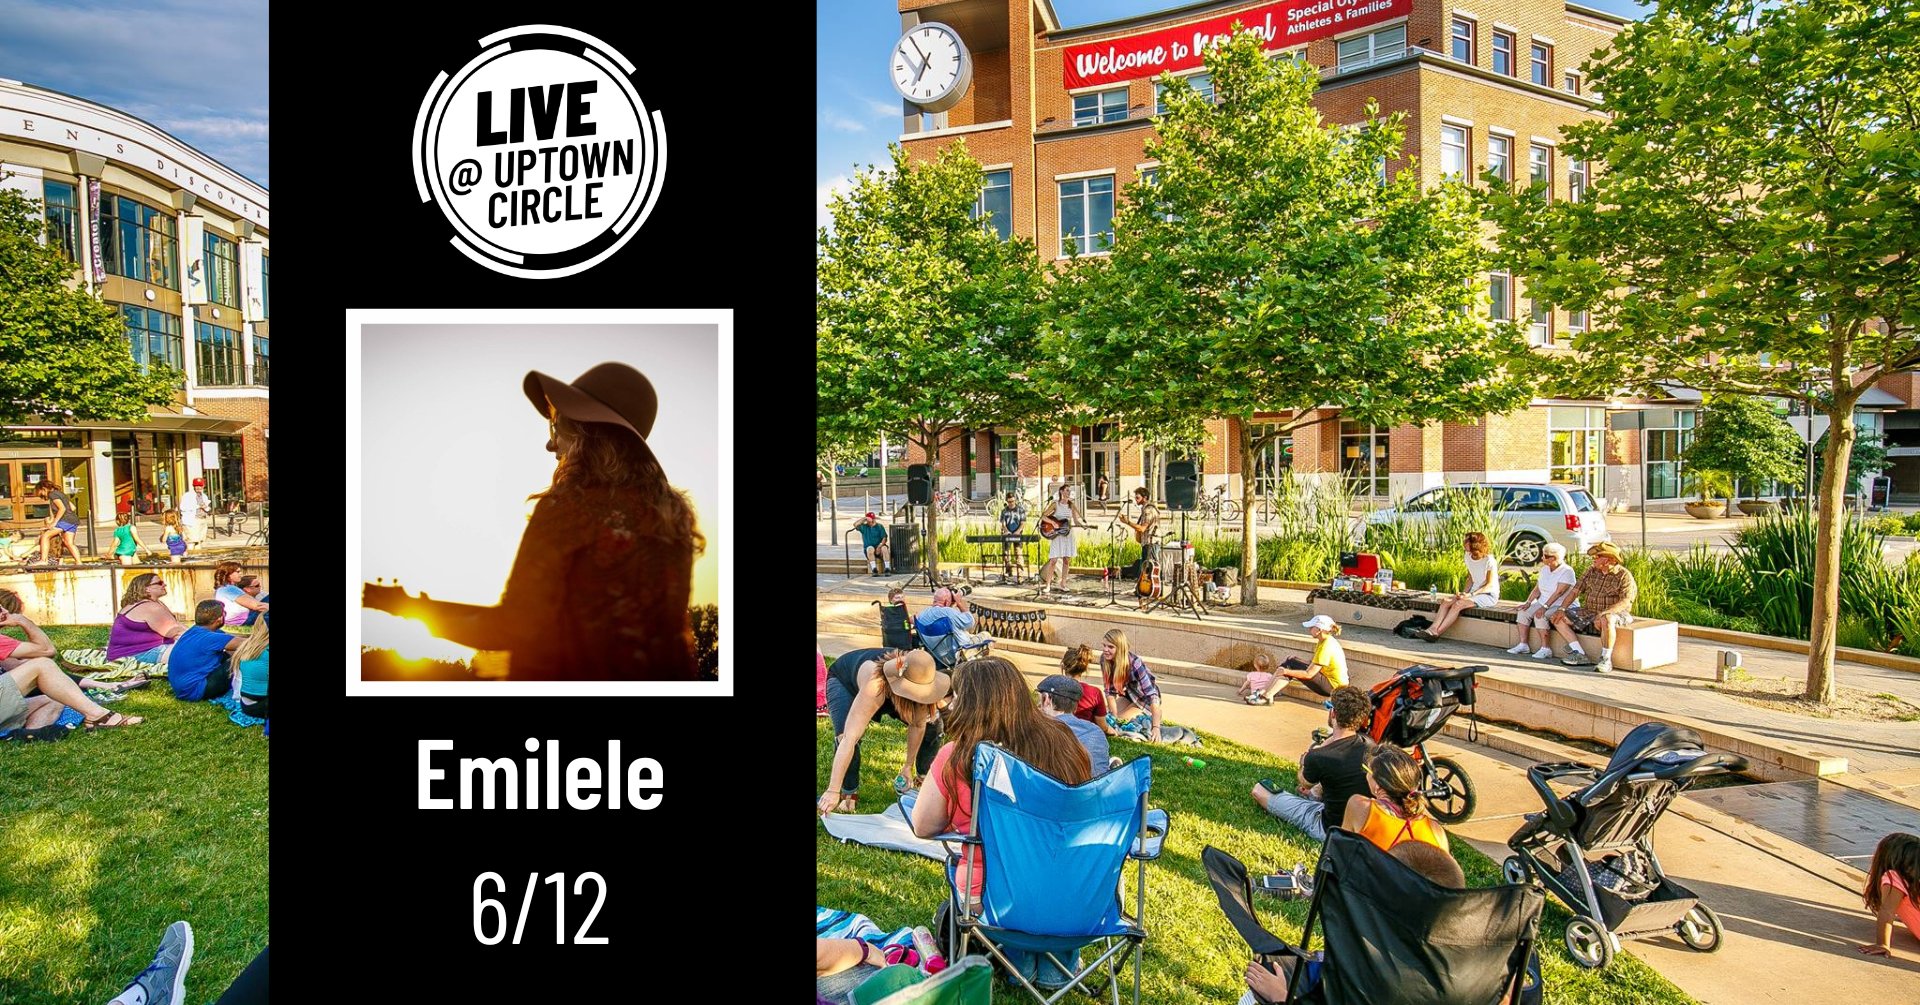 Normal LIVE presents Emilele @ Uptown Circle